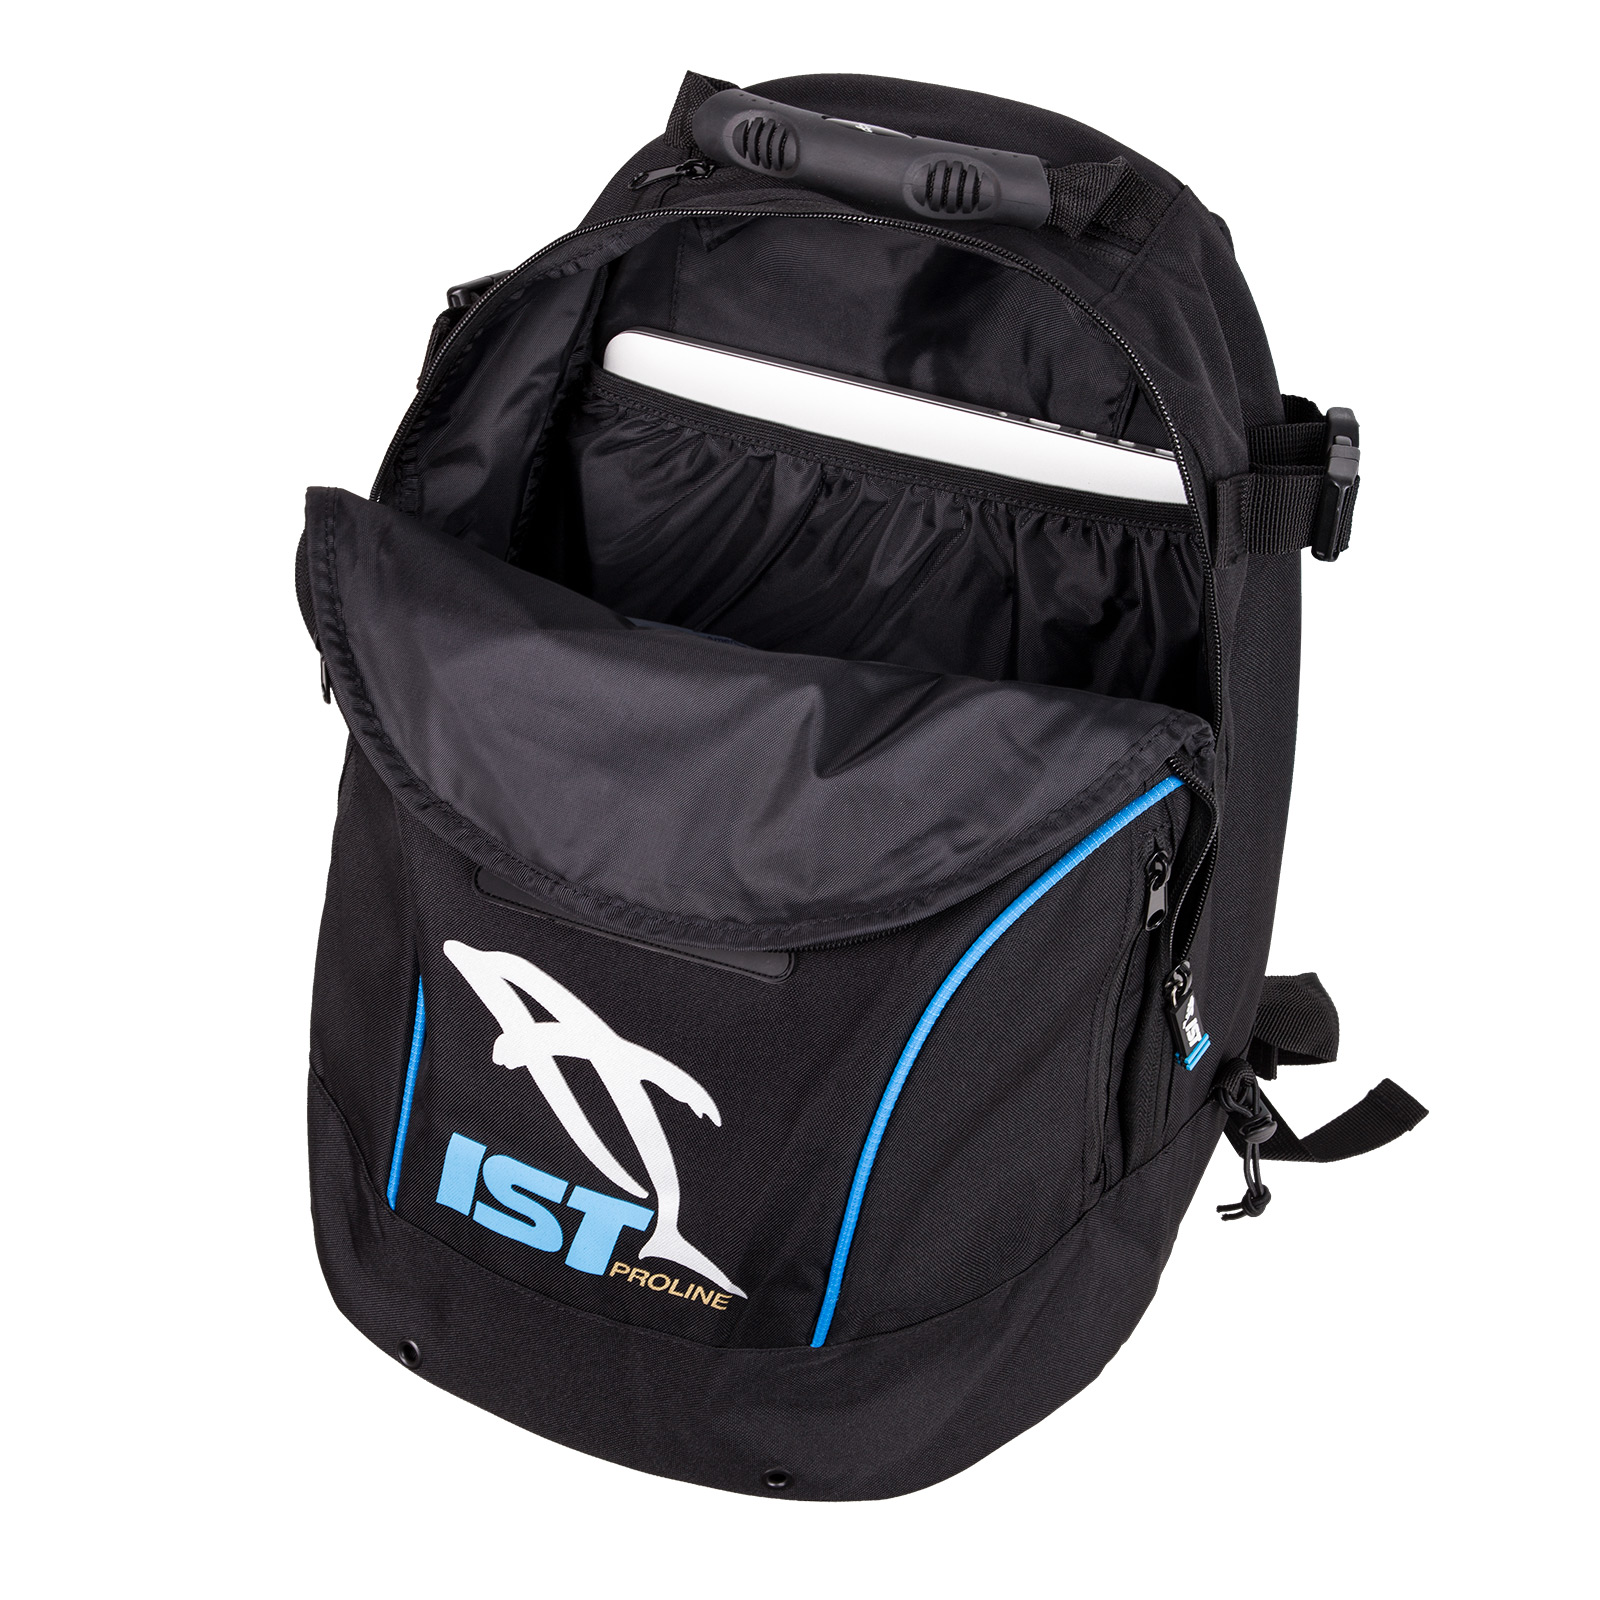 IST SPORTS CORP. :: FREEDIVING/APNEA :: Buoy, Bag & Accessories :: Free  Diving Backpack